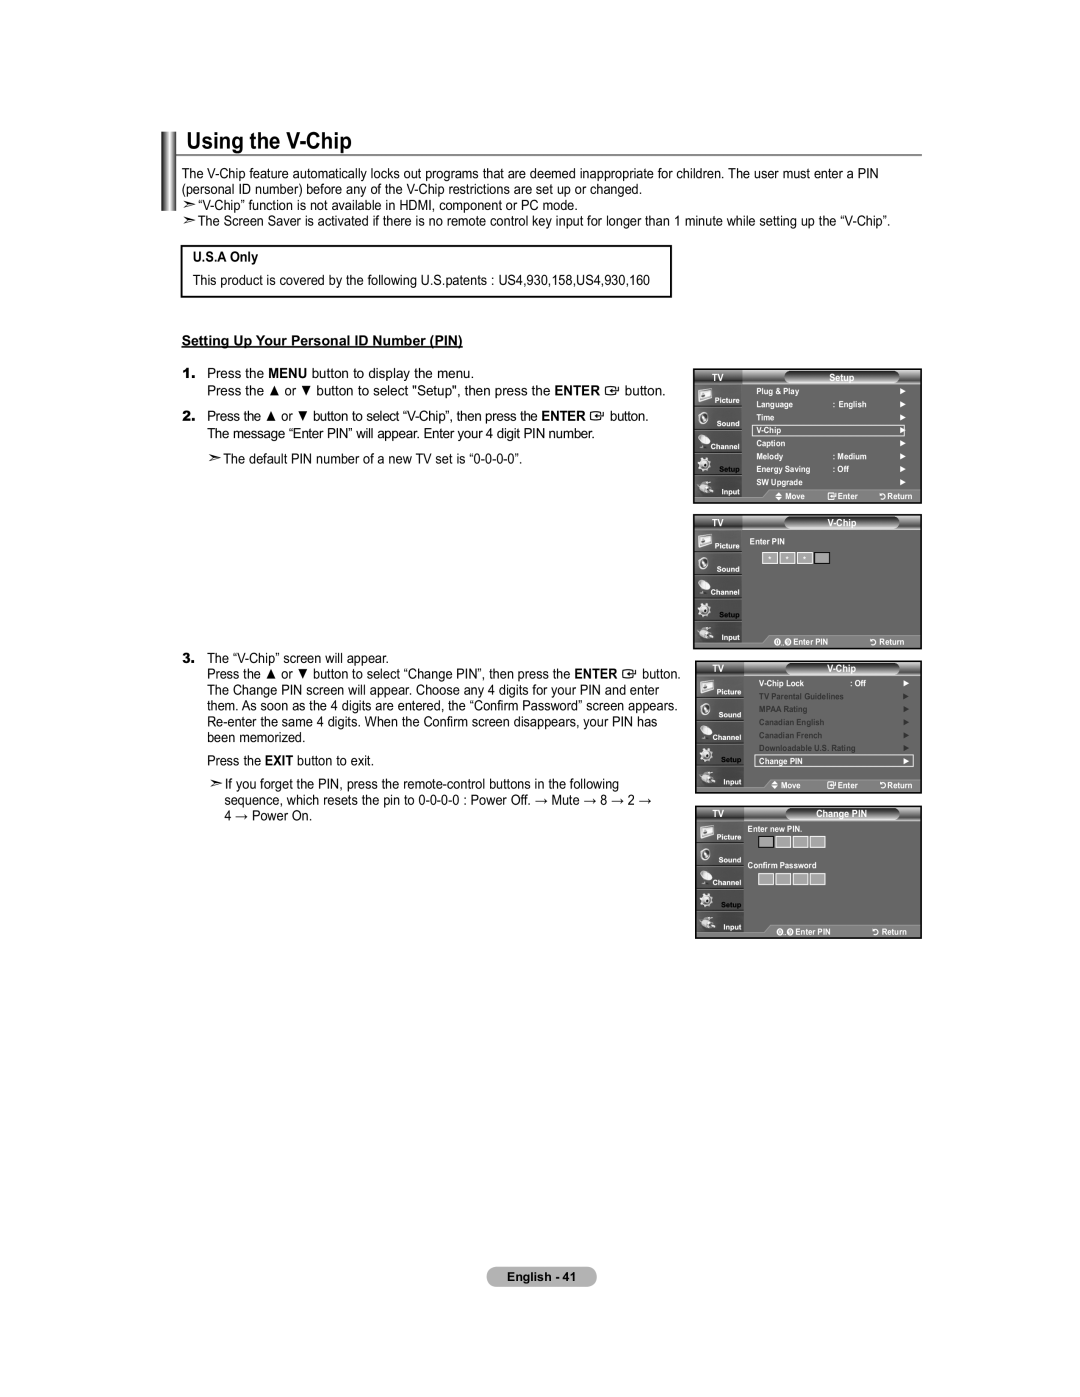 Samsung 451 user manual Using the V-Chip, U.S.A Only, Setting Up Your Personal ID Number PIN 